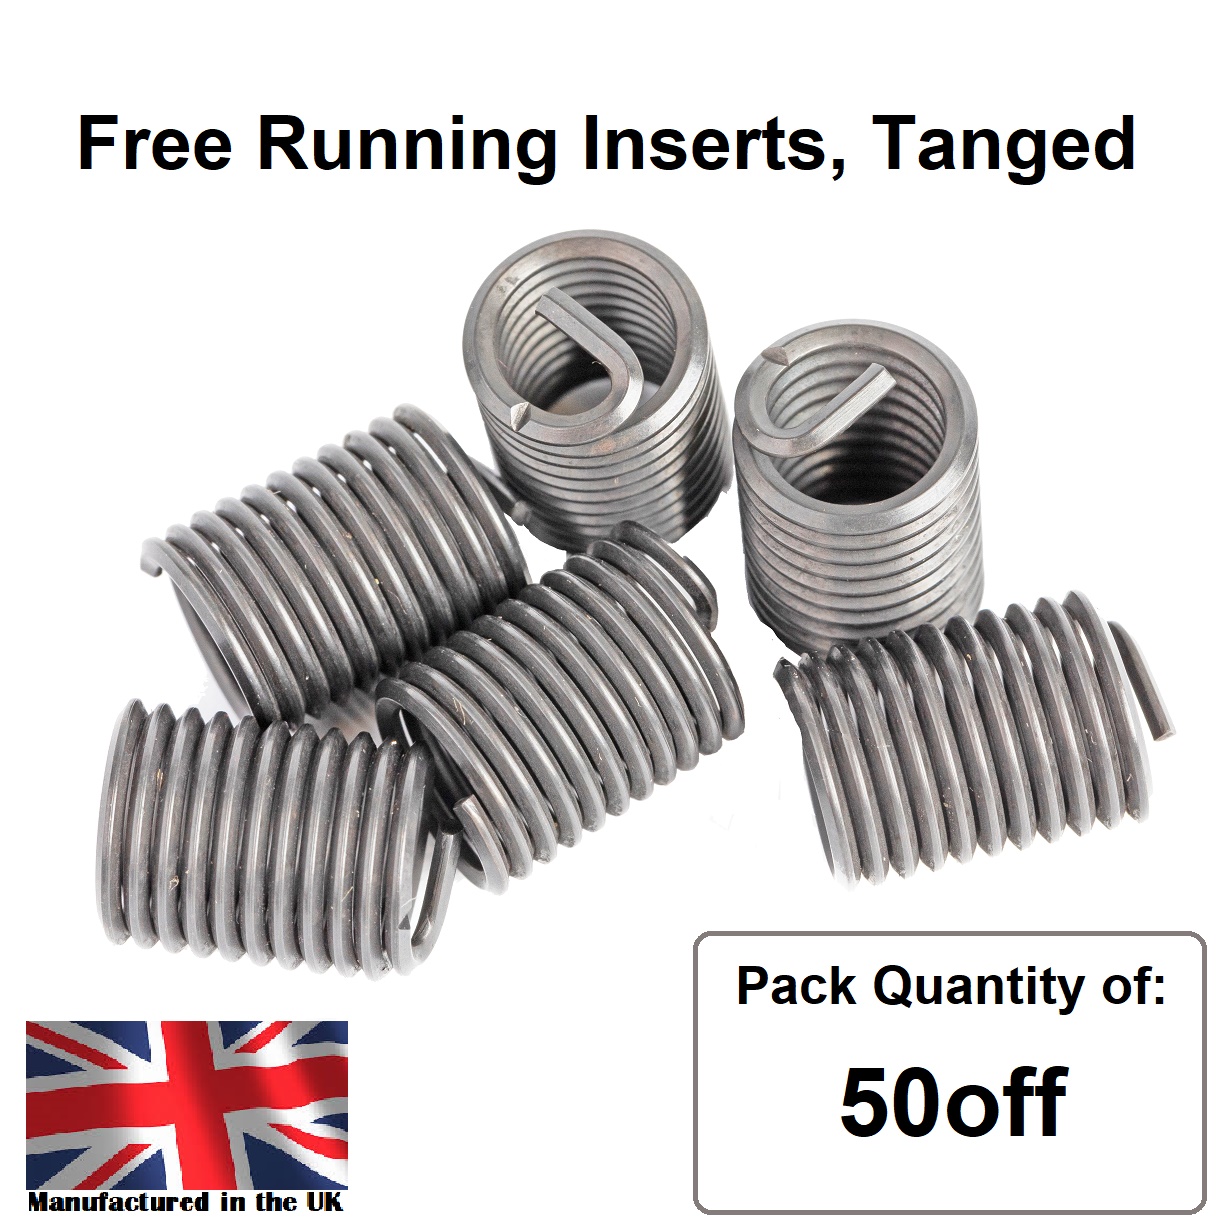 M4 x 0.7 x 1D Metric Coarse, Free Running, Tanged, Wire Thread Repair Insert, 304/A2 Stainless (Pack 50)